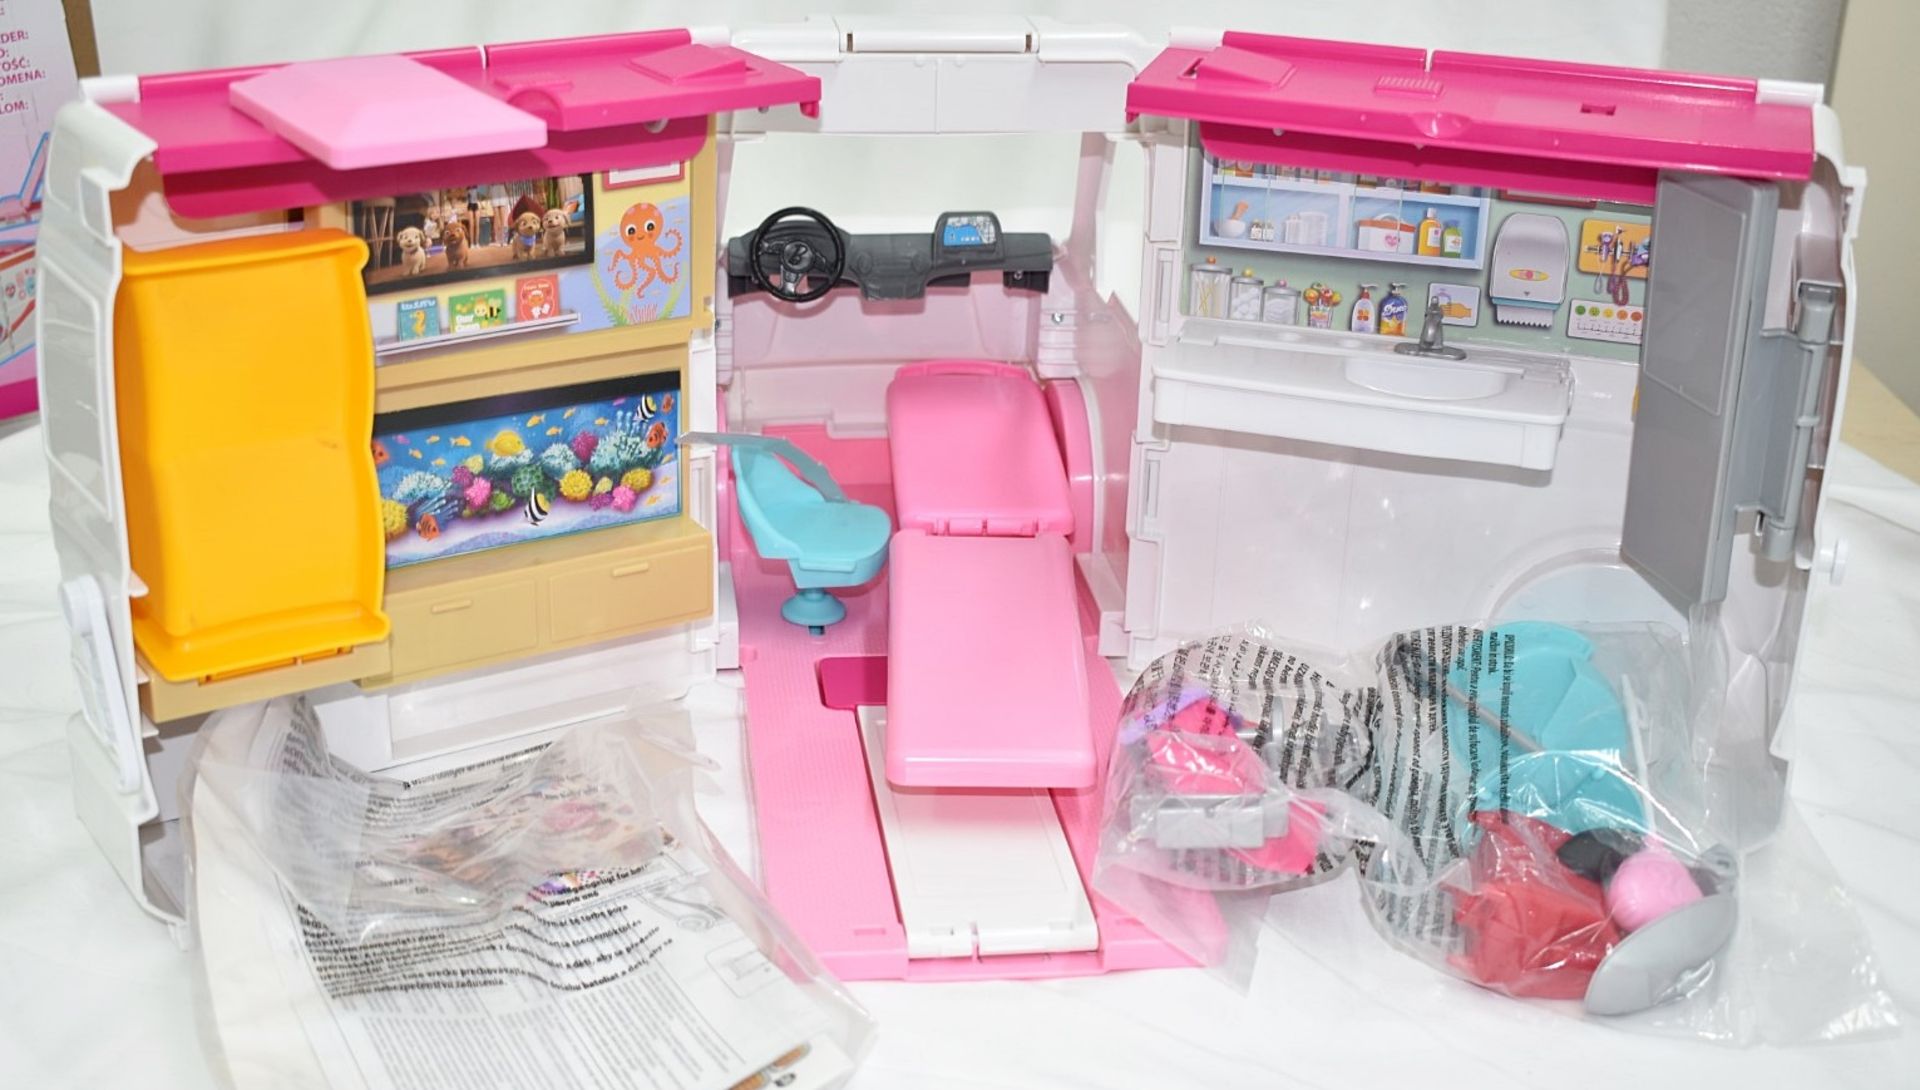 1 x BARBIE Care Clinic Playset With Siren Lights and Sound - Original Price £62.95 - Boxed Stock - Image 8 of 11